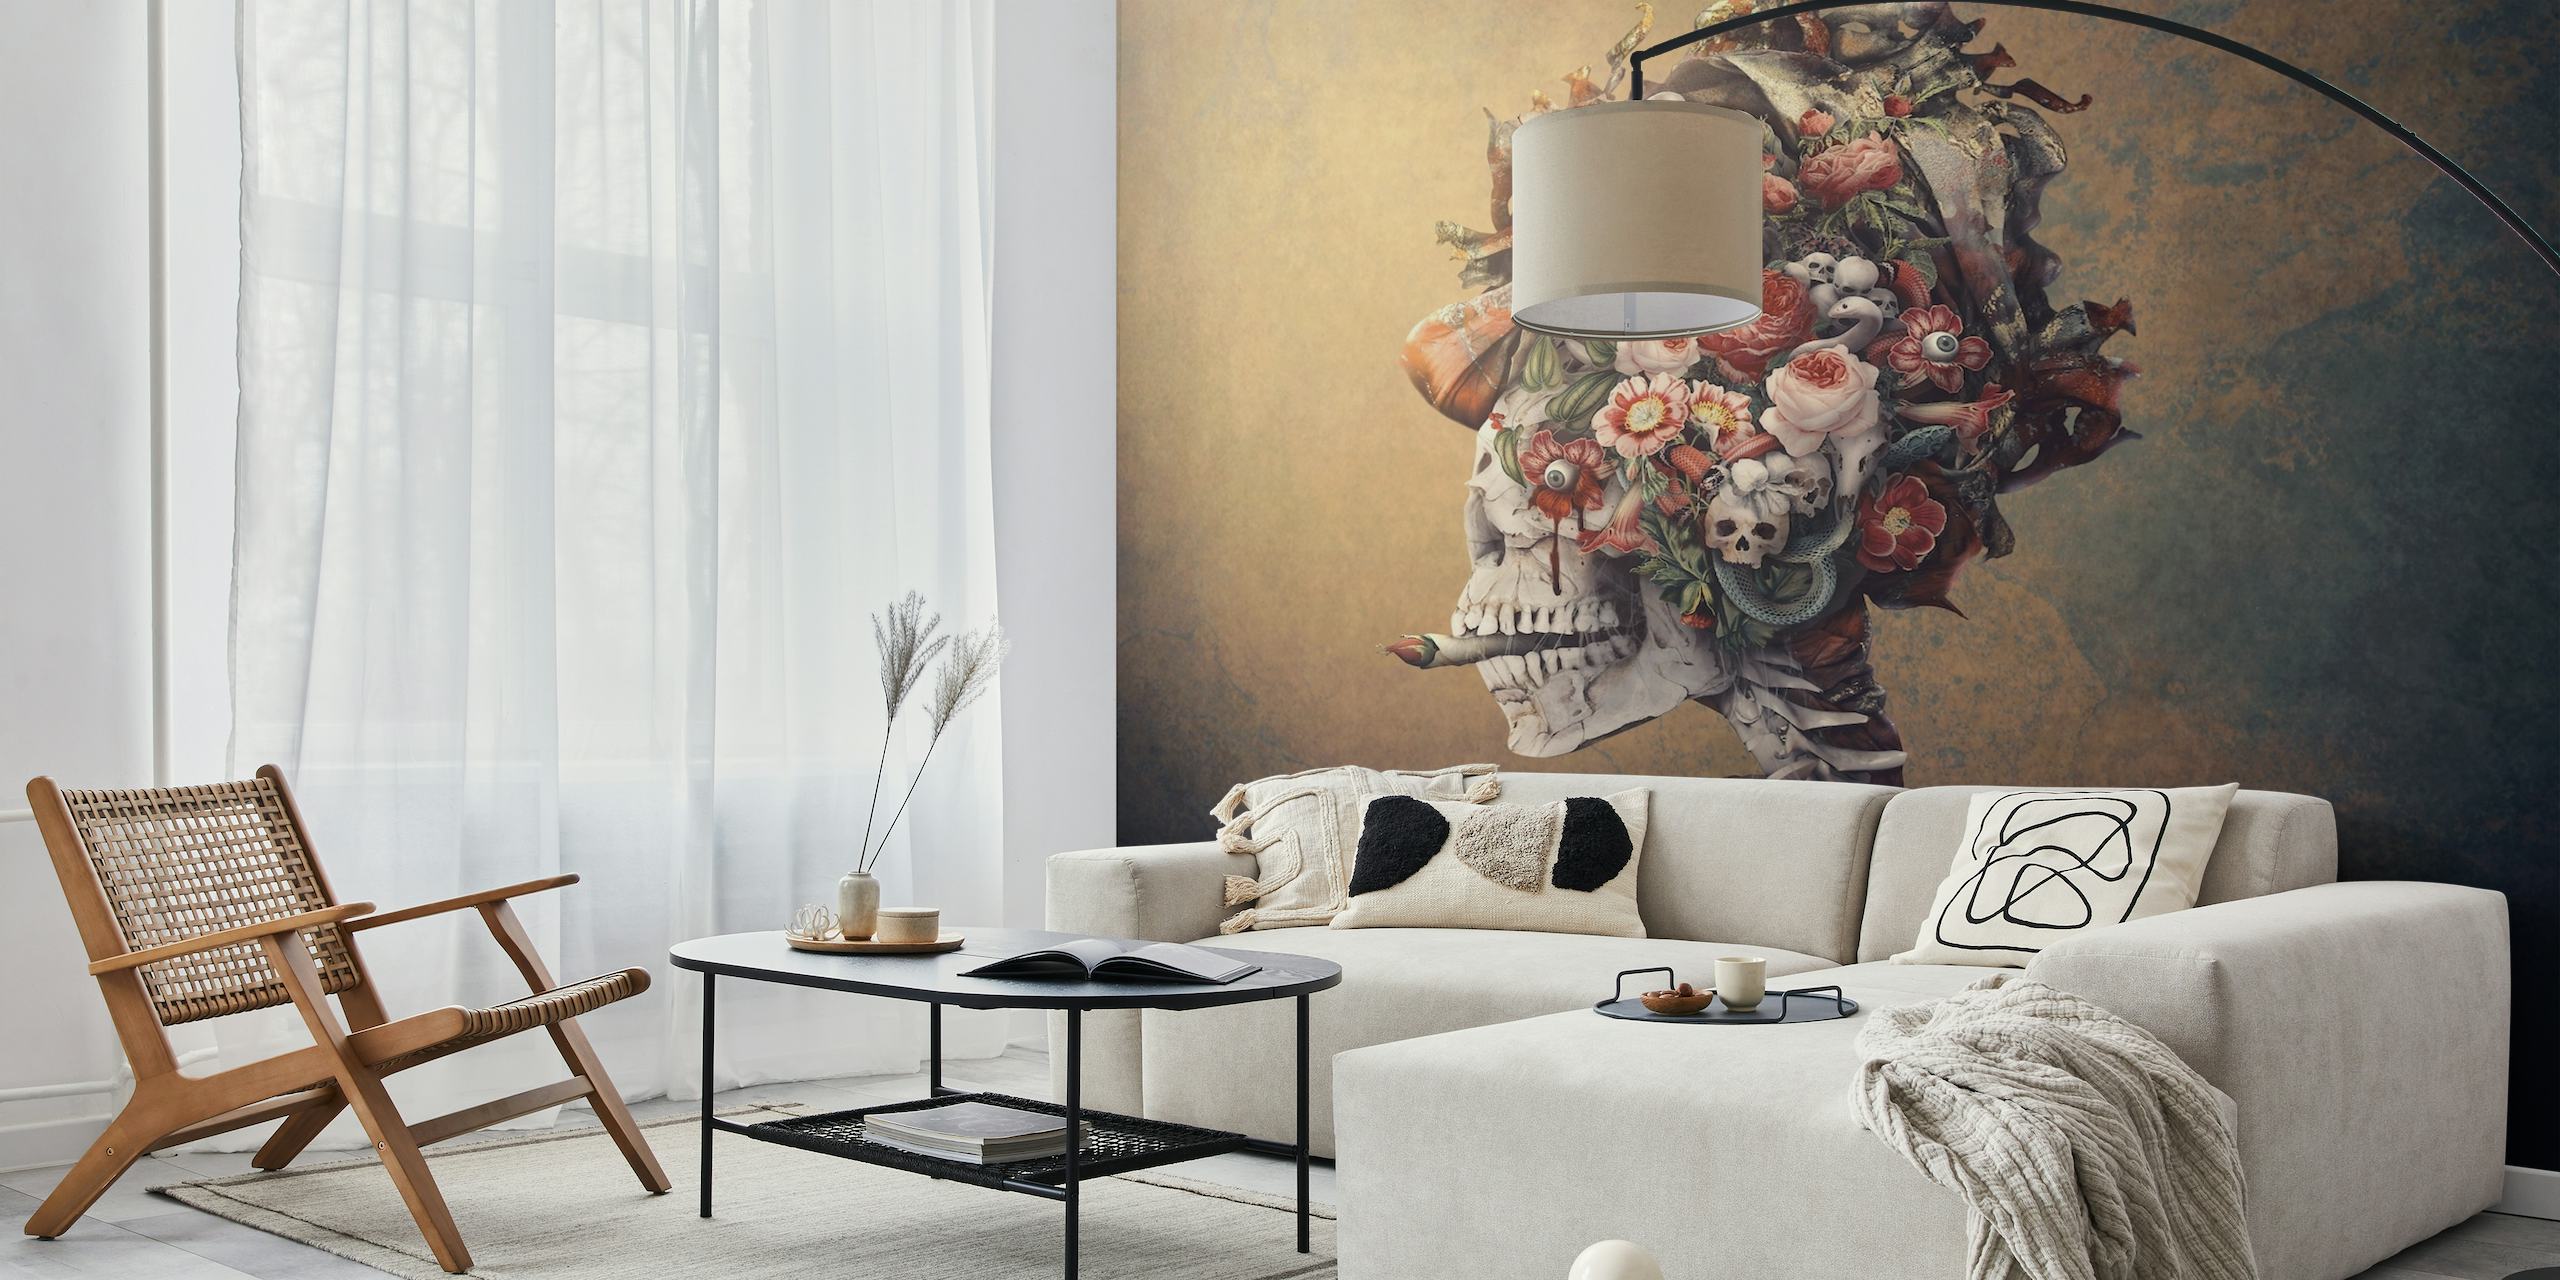 Surreal wall mural with intertwined floral and faunal elements evoking a mysterious aura